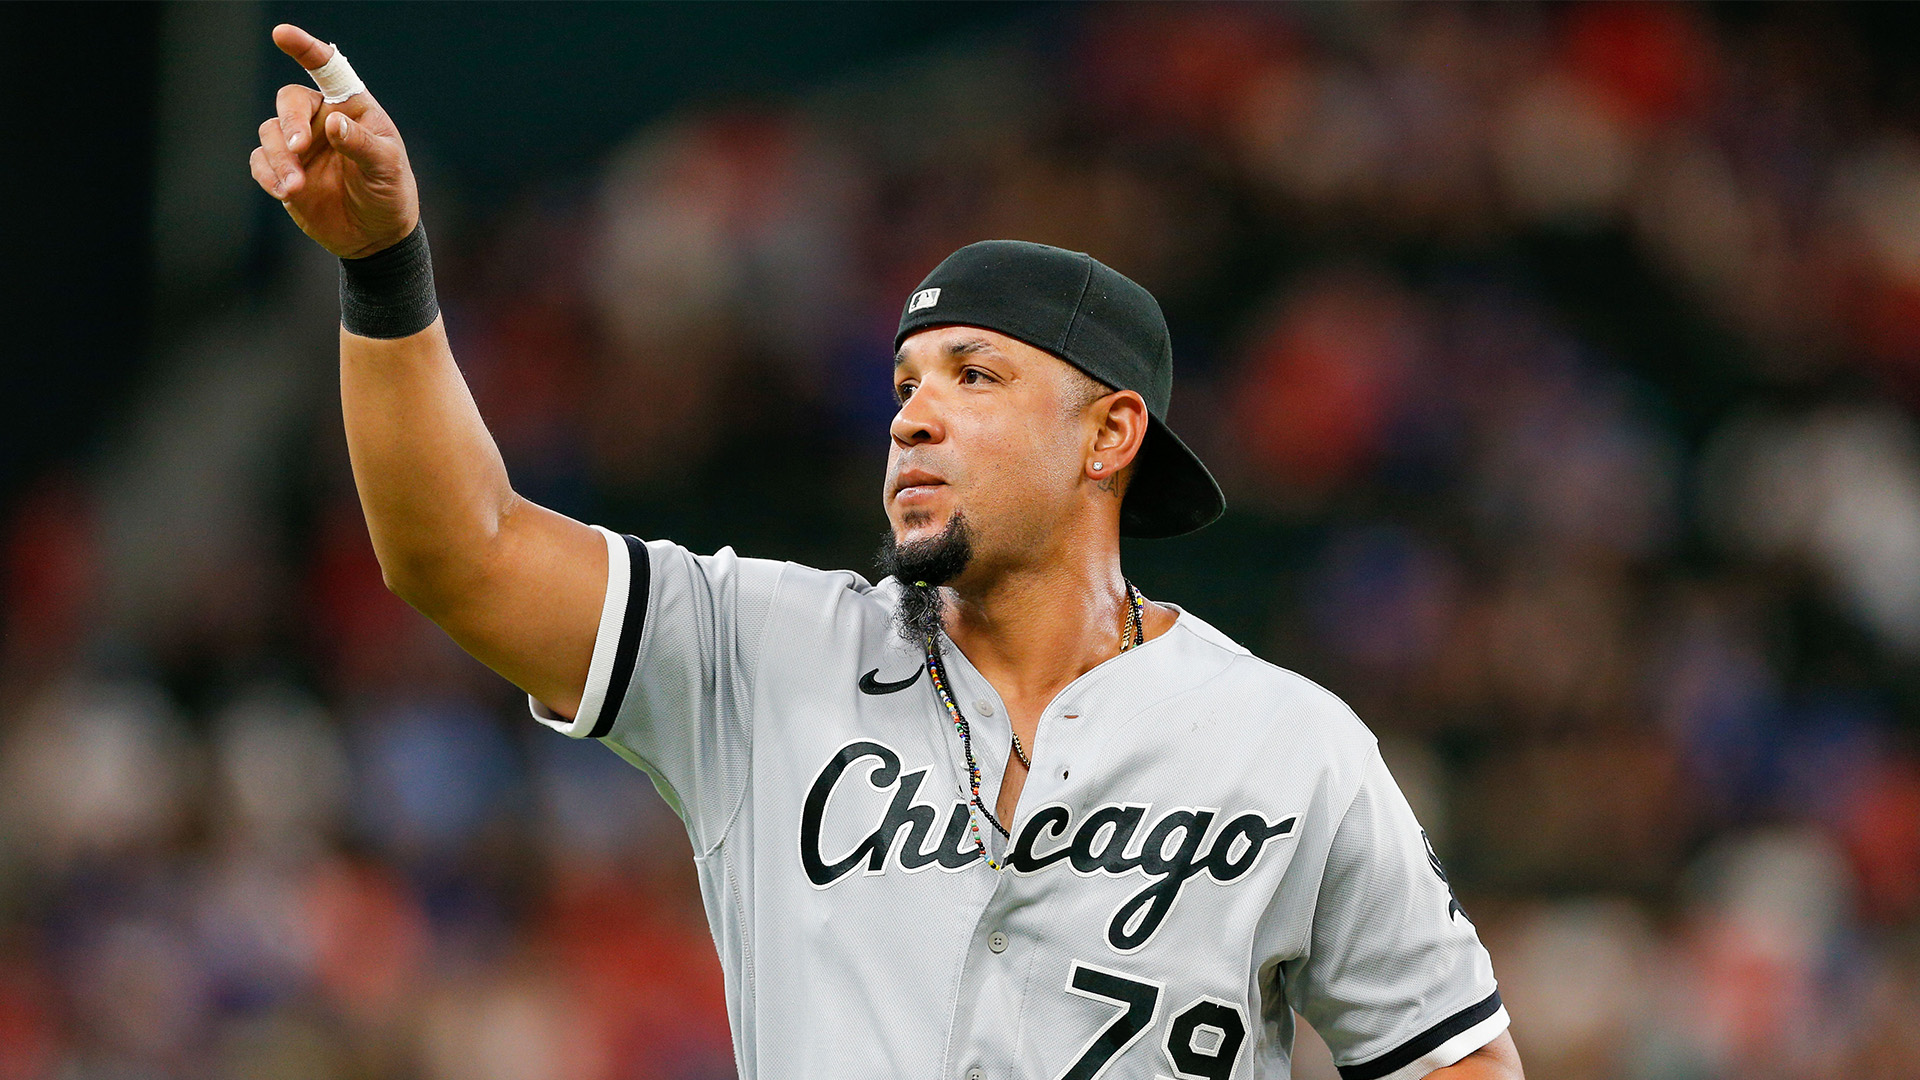 Report: White Sox to let José Abreu sign elsewhere in free agency